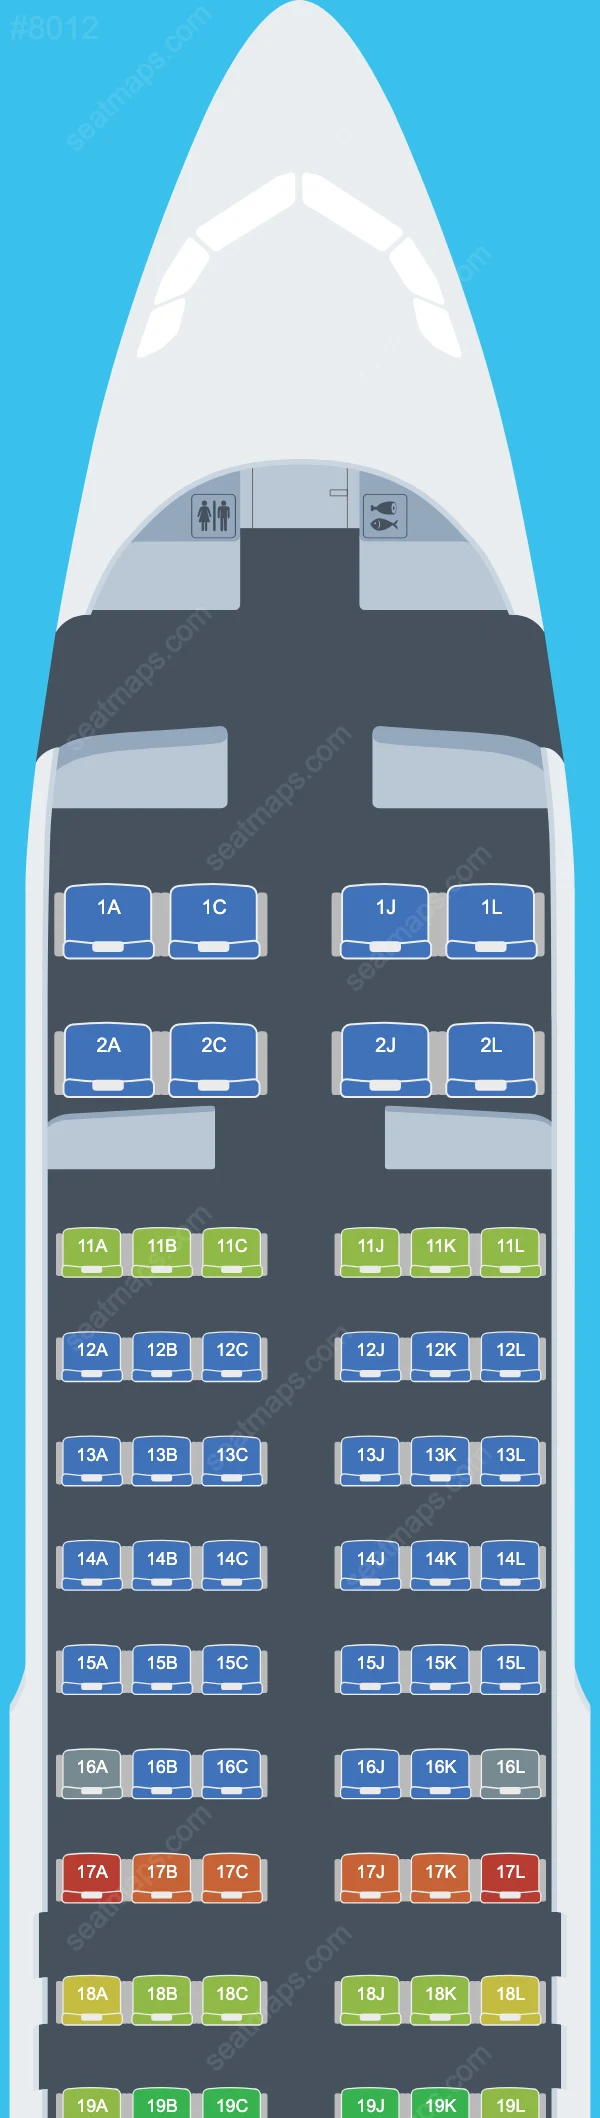 Air China Airbus A320 Seat Maps A320-200neo